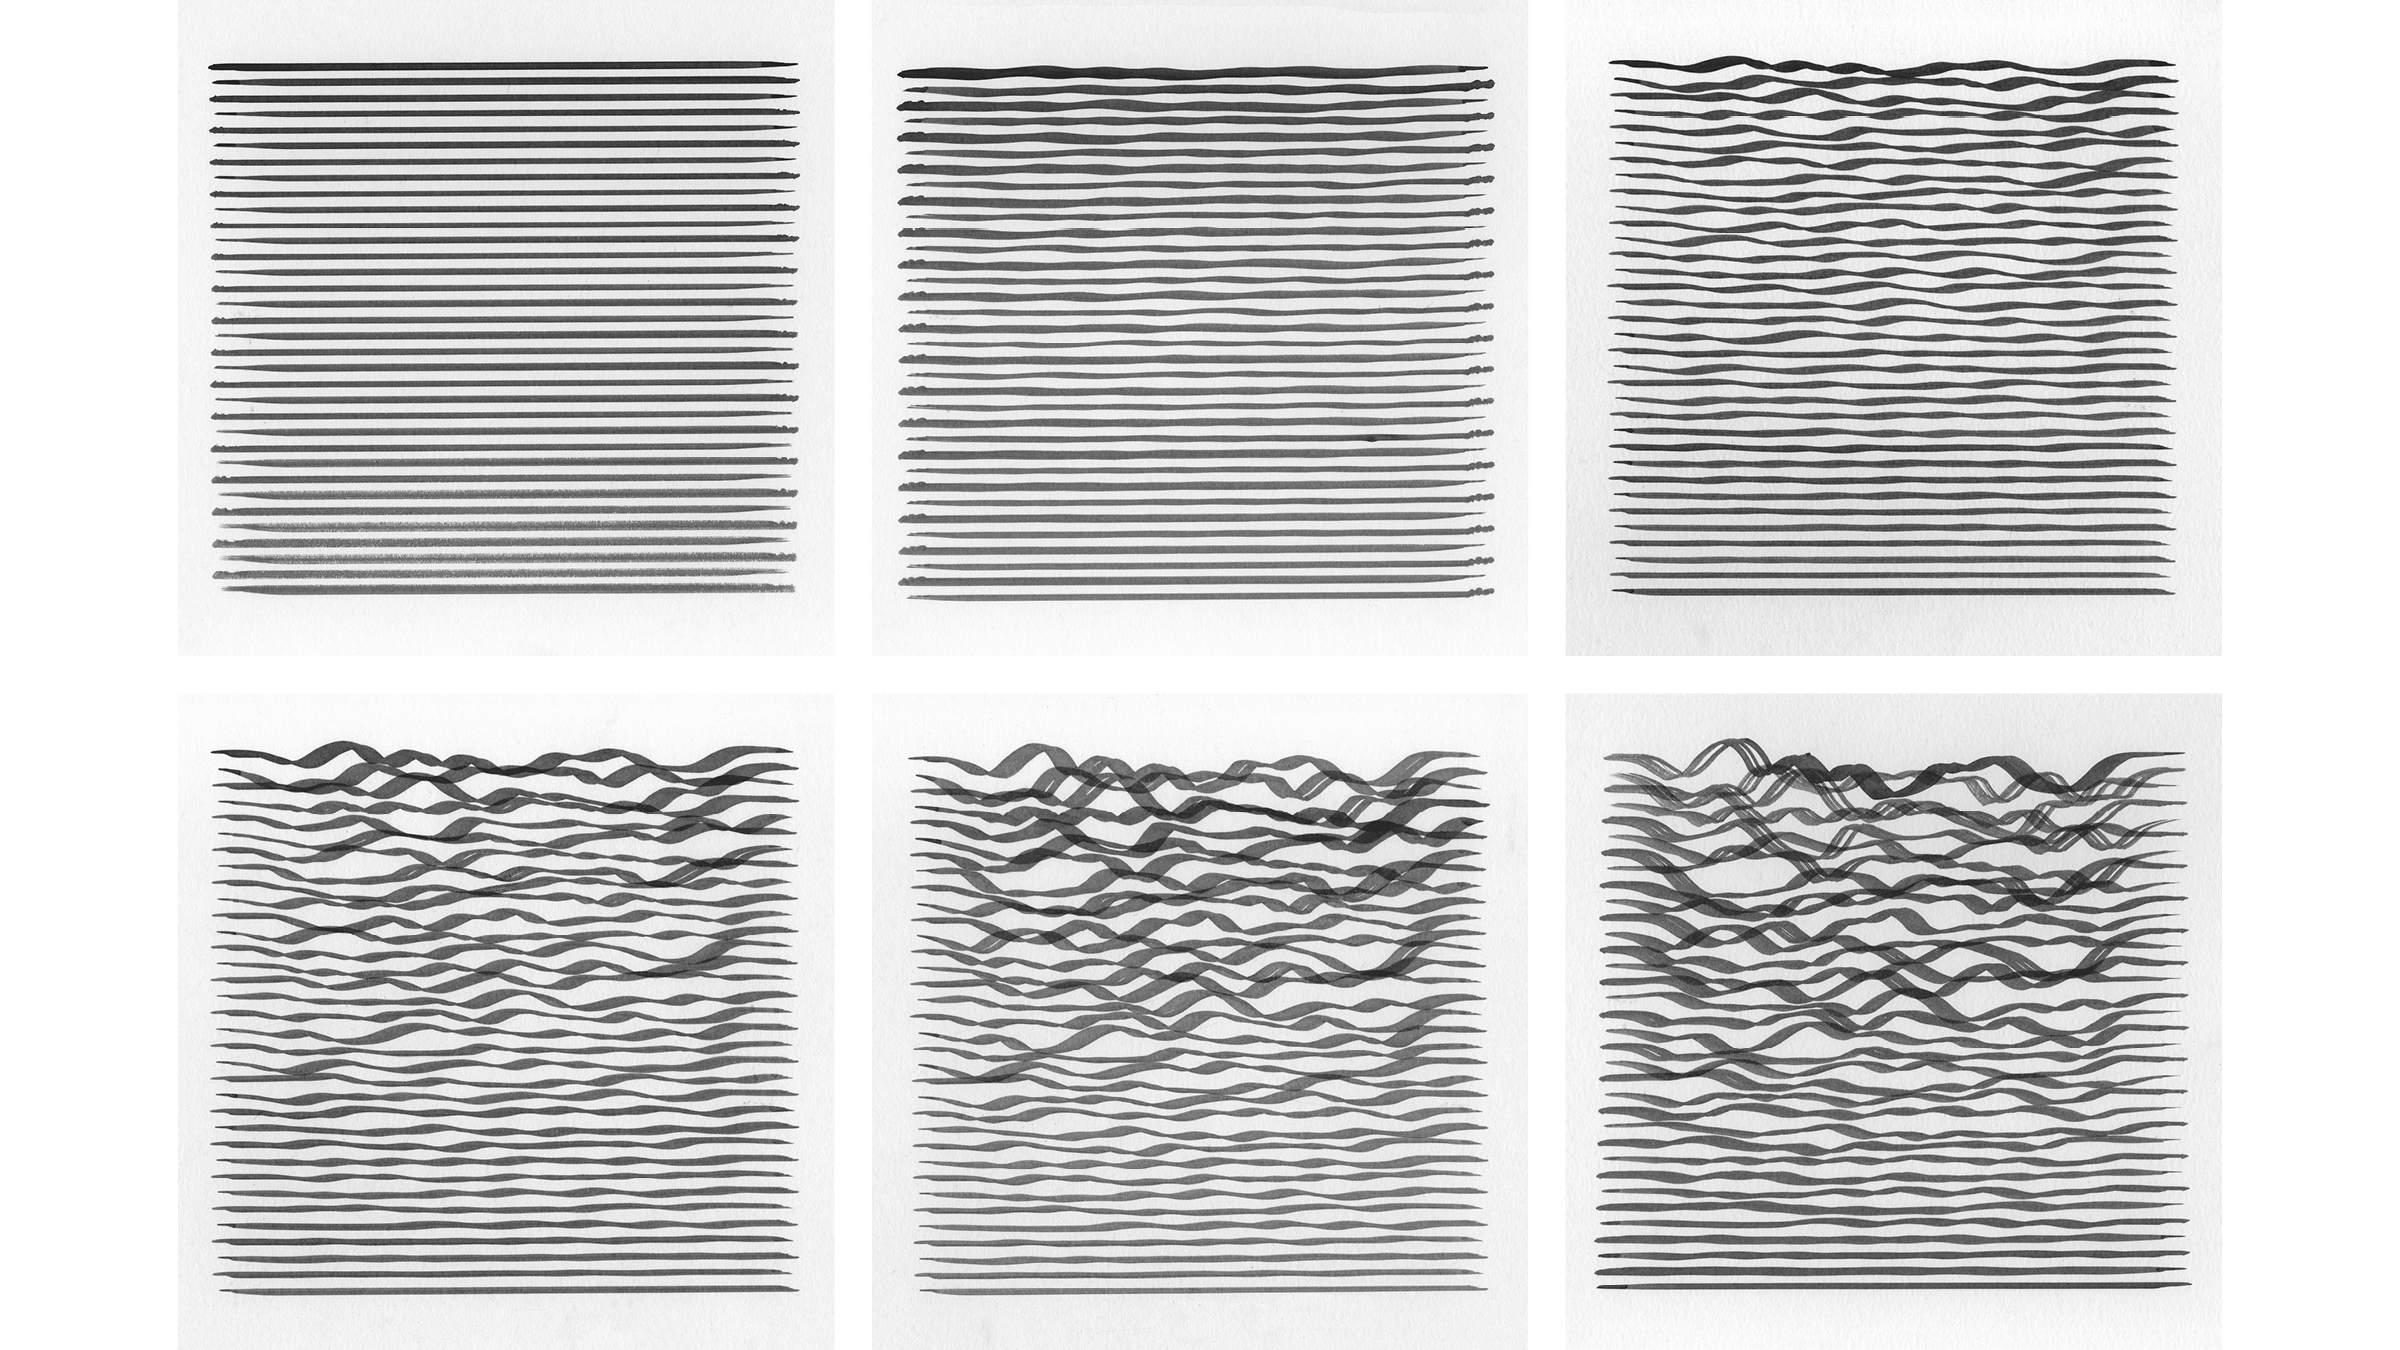   Waves , Seed 28, Increments 0 to 100 